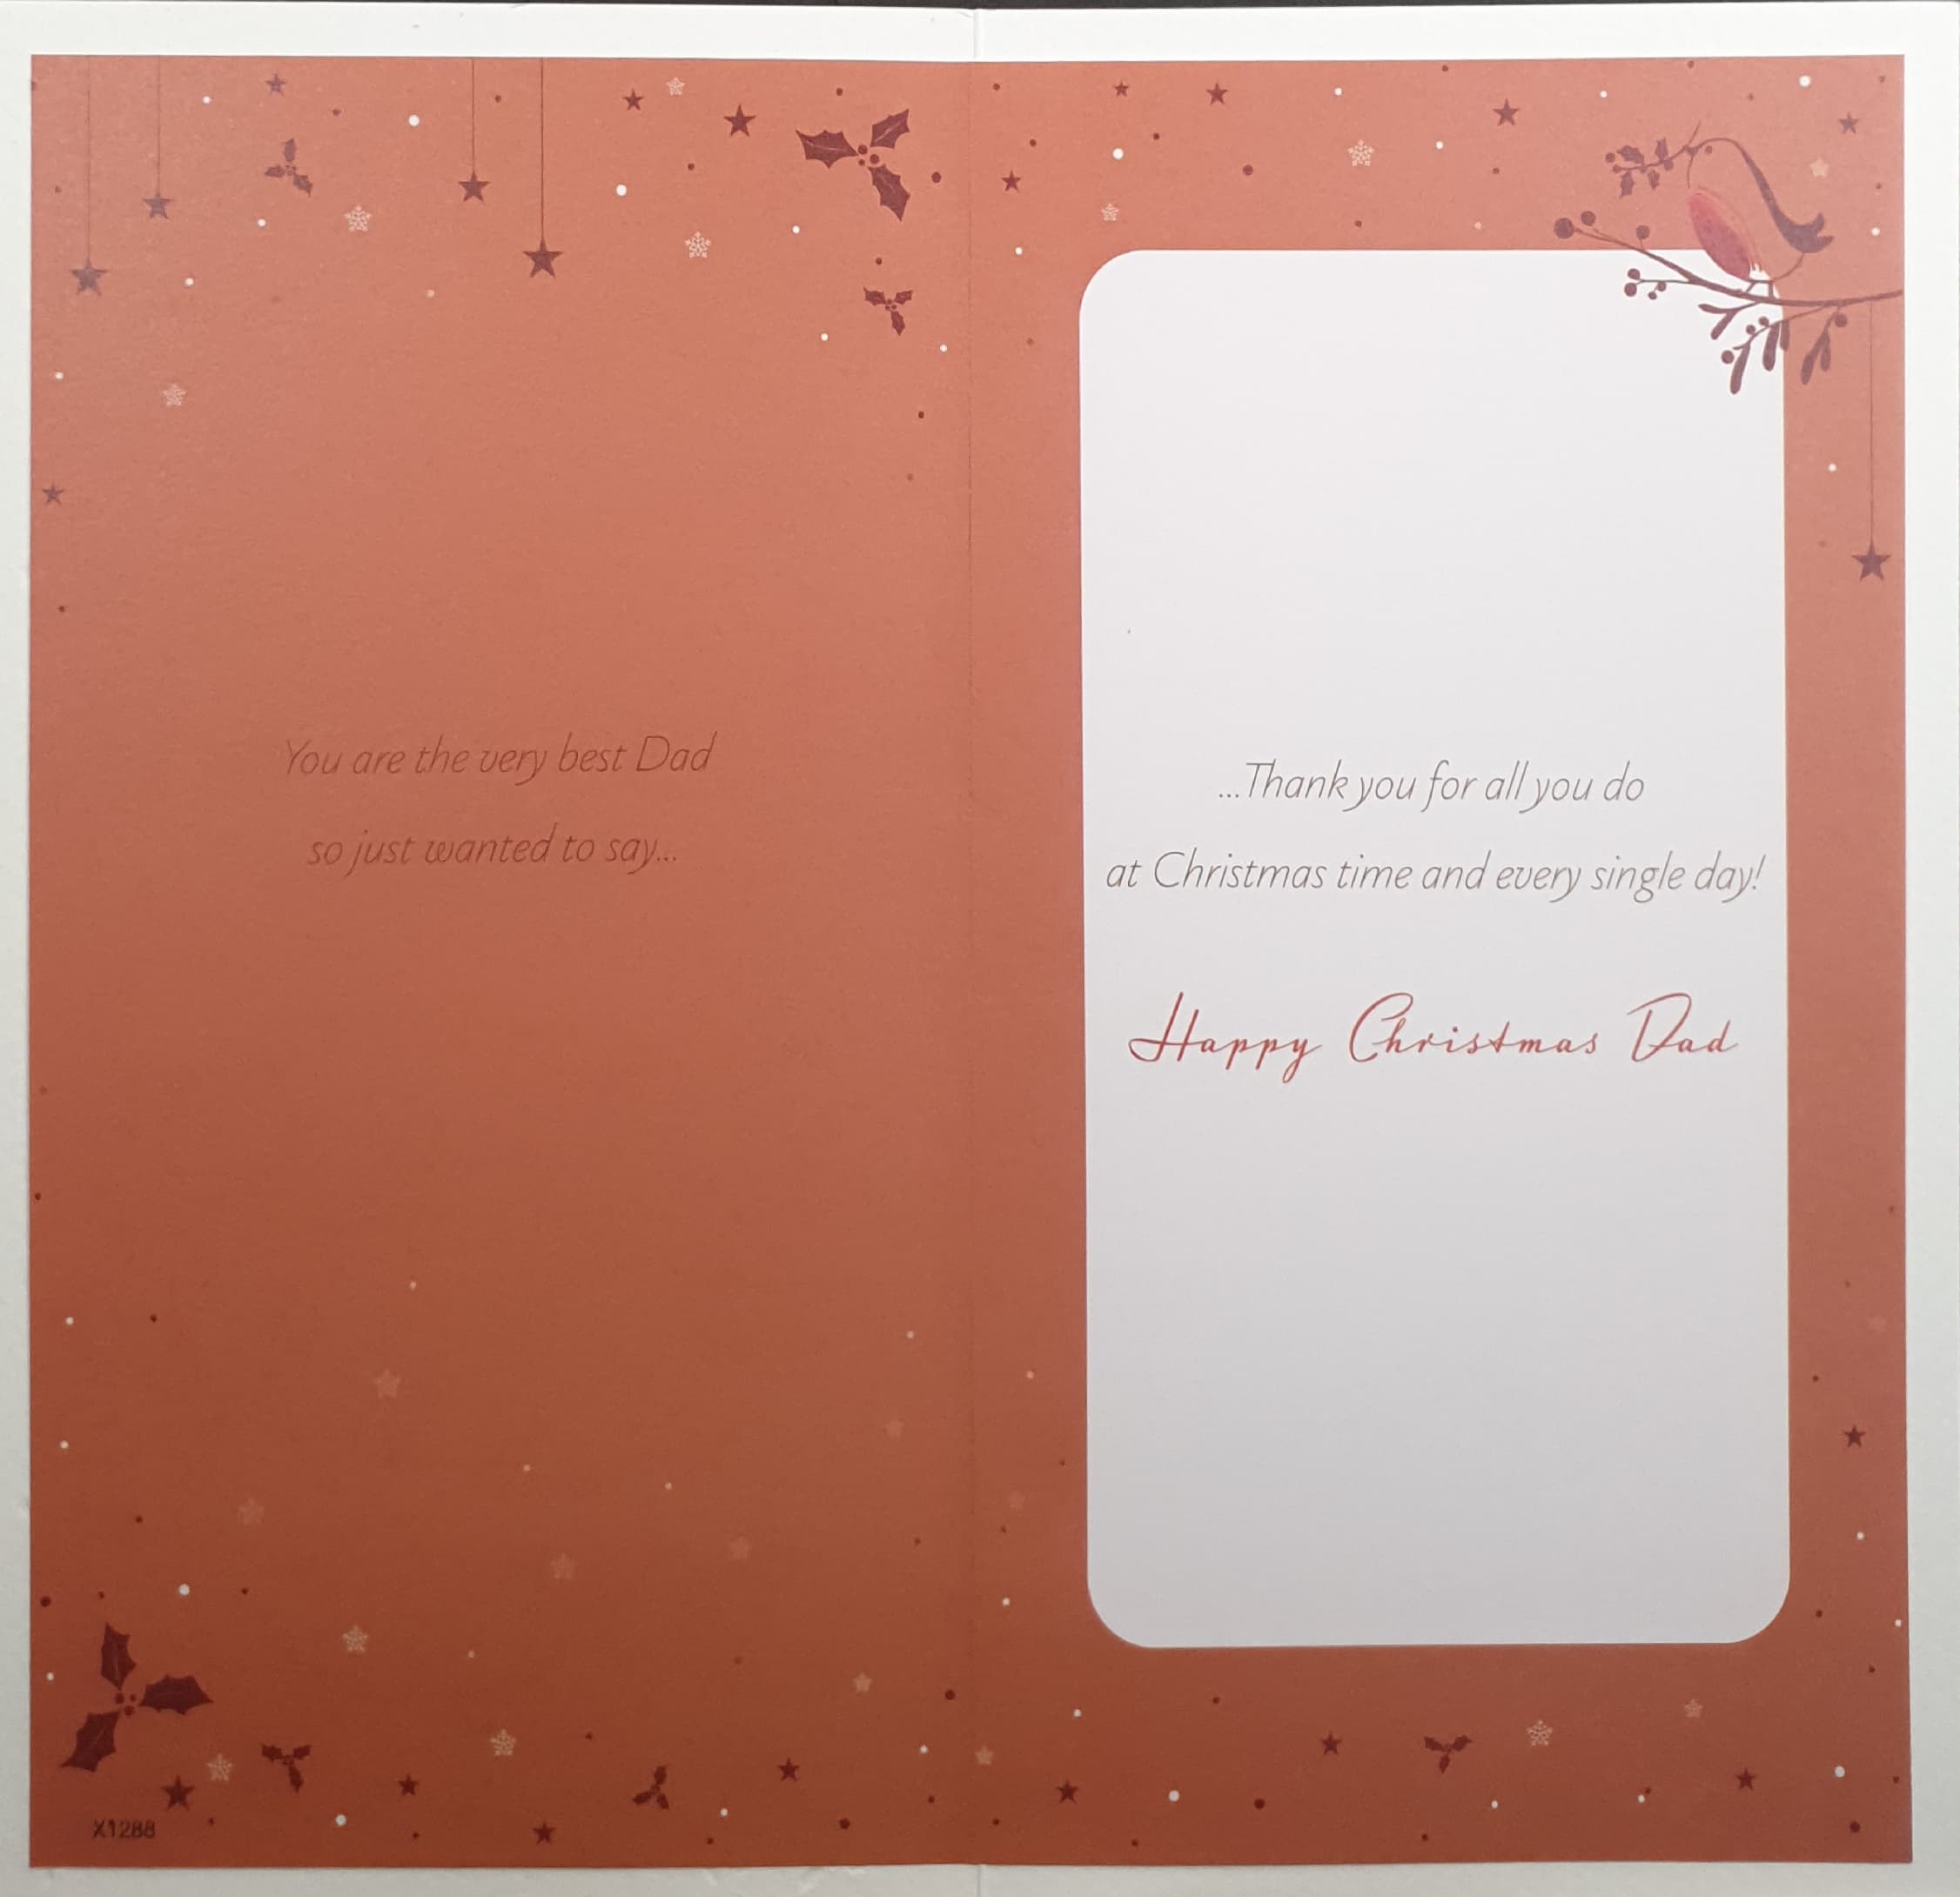 Dad Christmas Card - Shine Gold Font & Robin on Branch